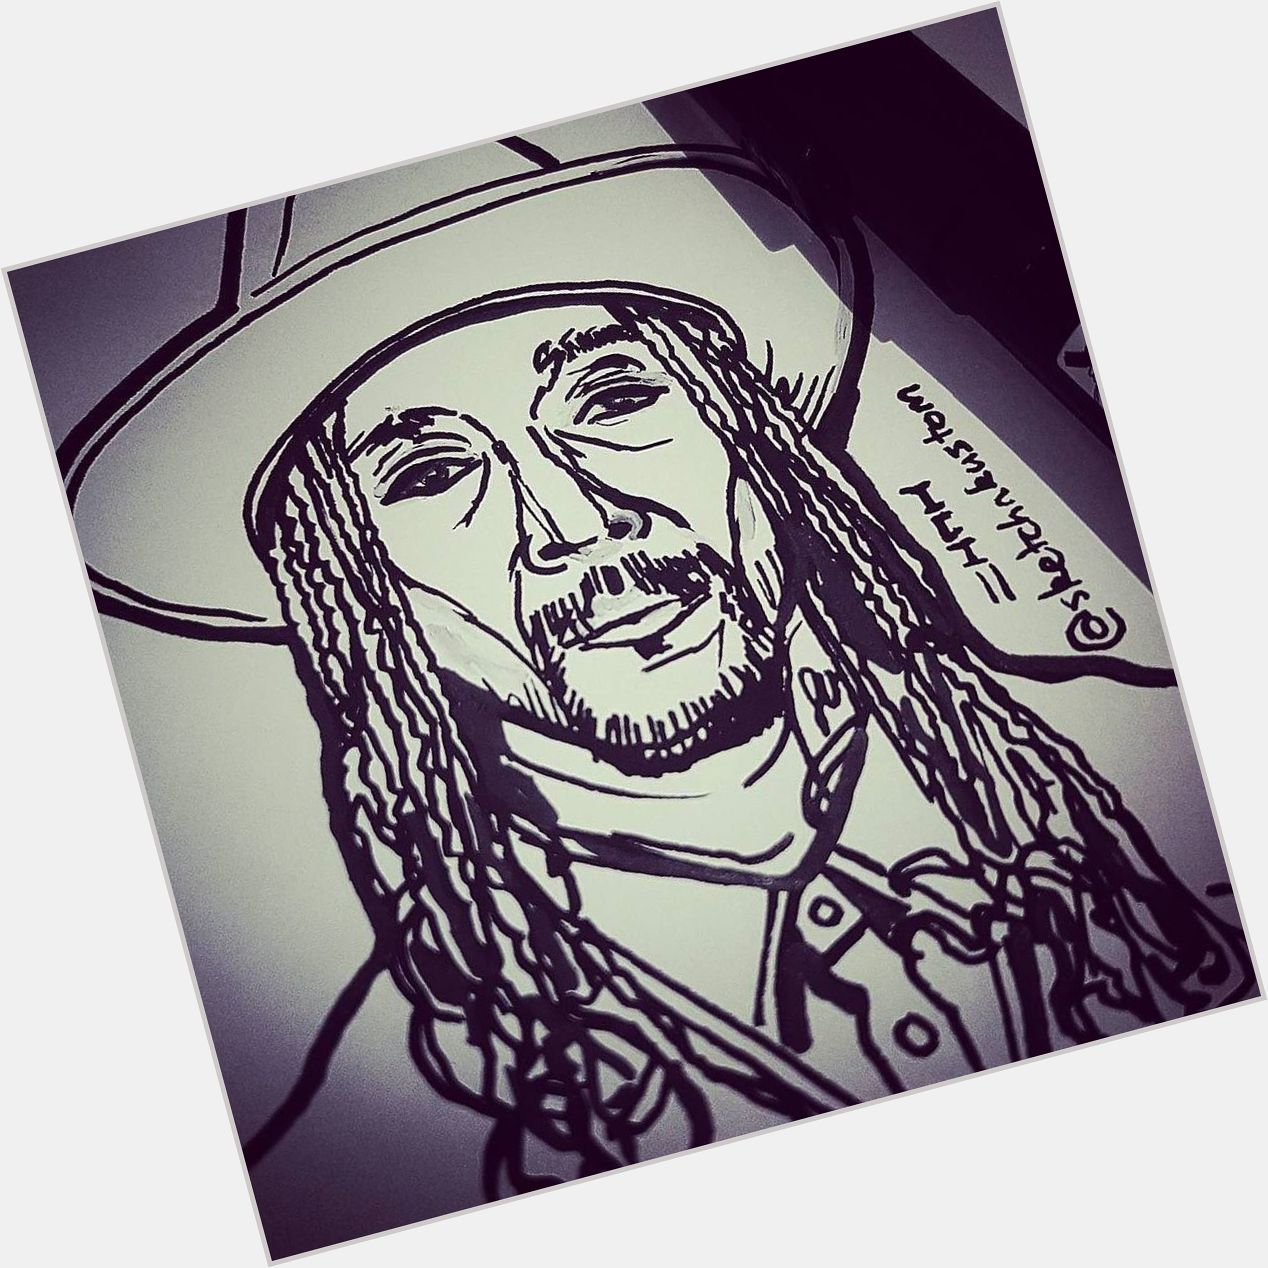 Happy birthday to the Midwest Cowboy Bizzy Bone - a huge influence in my art life! 